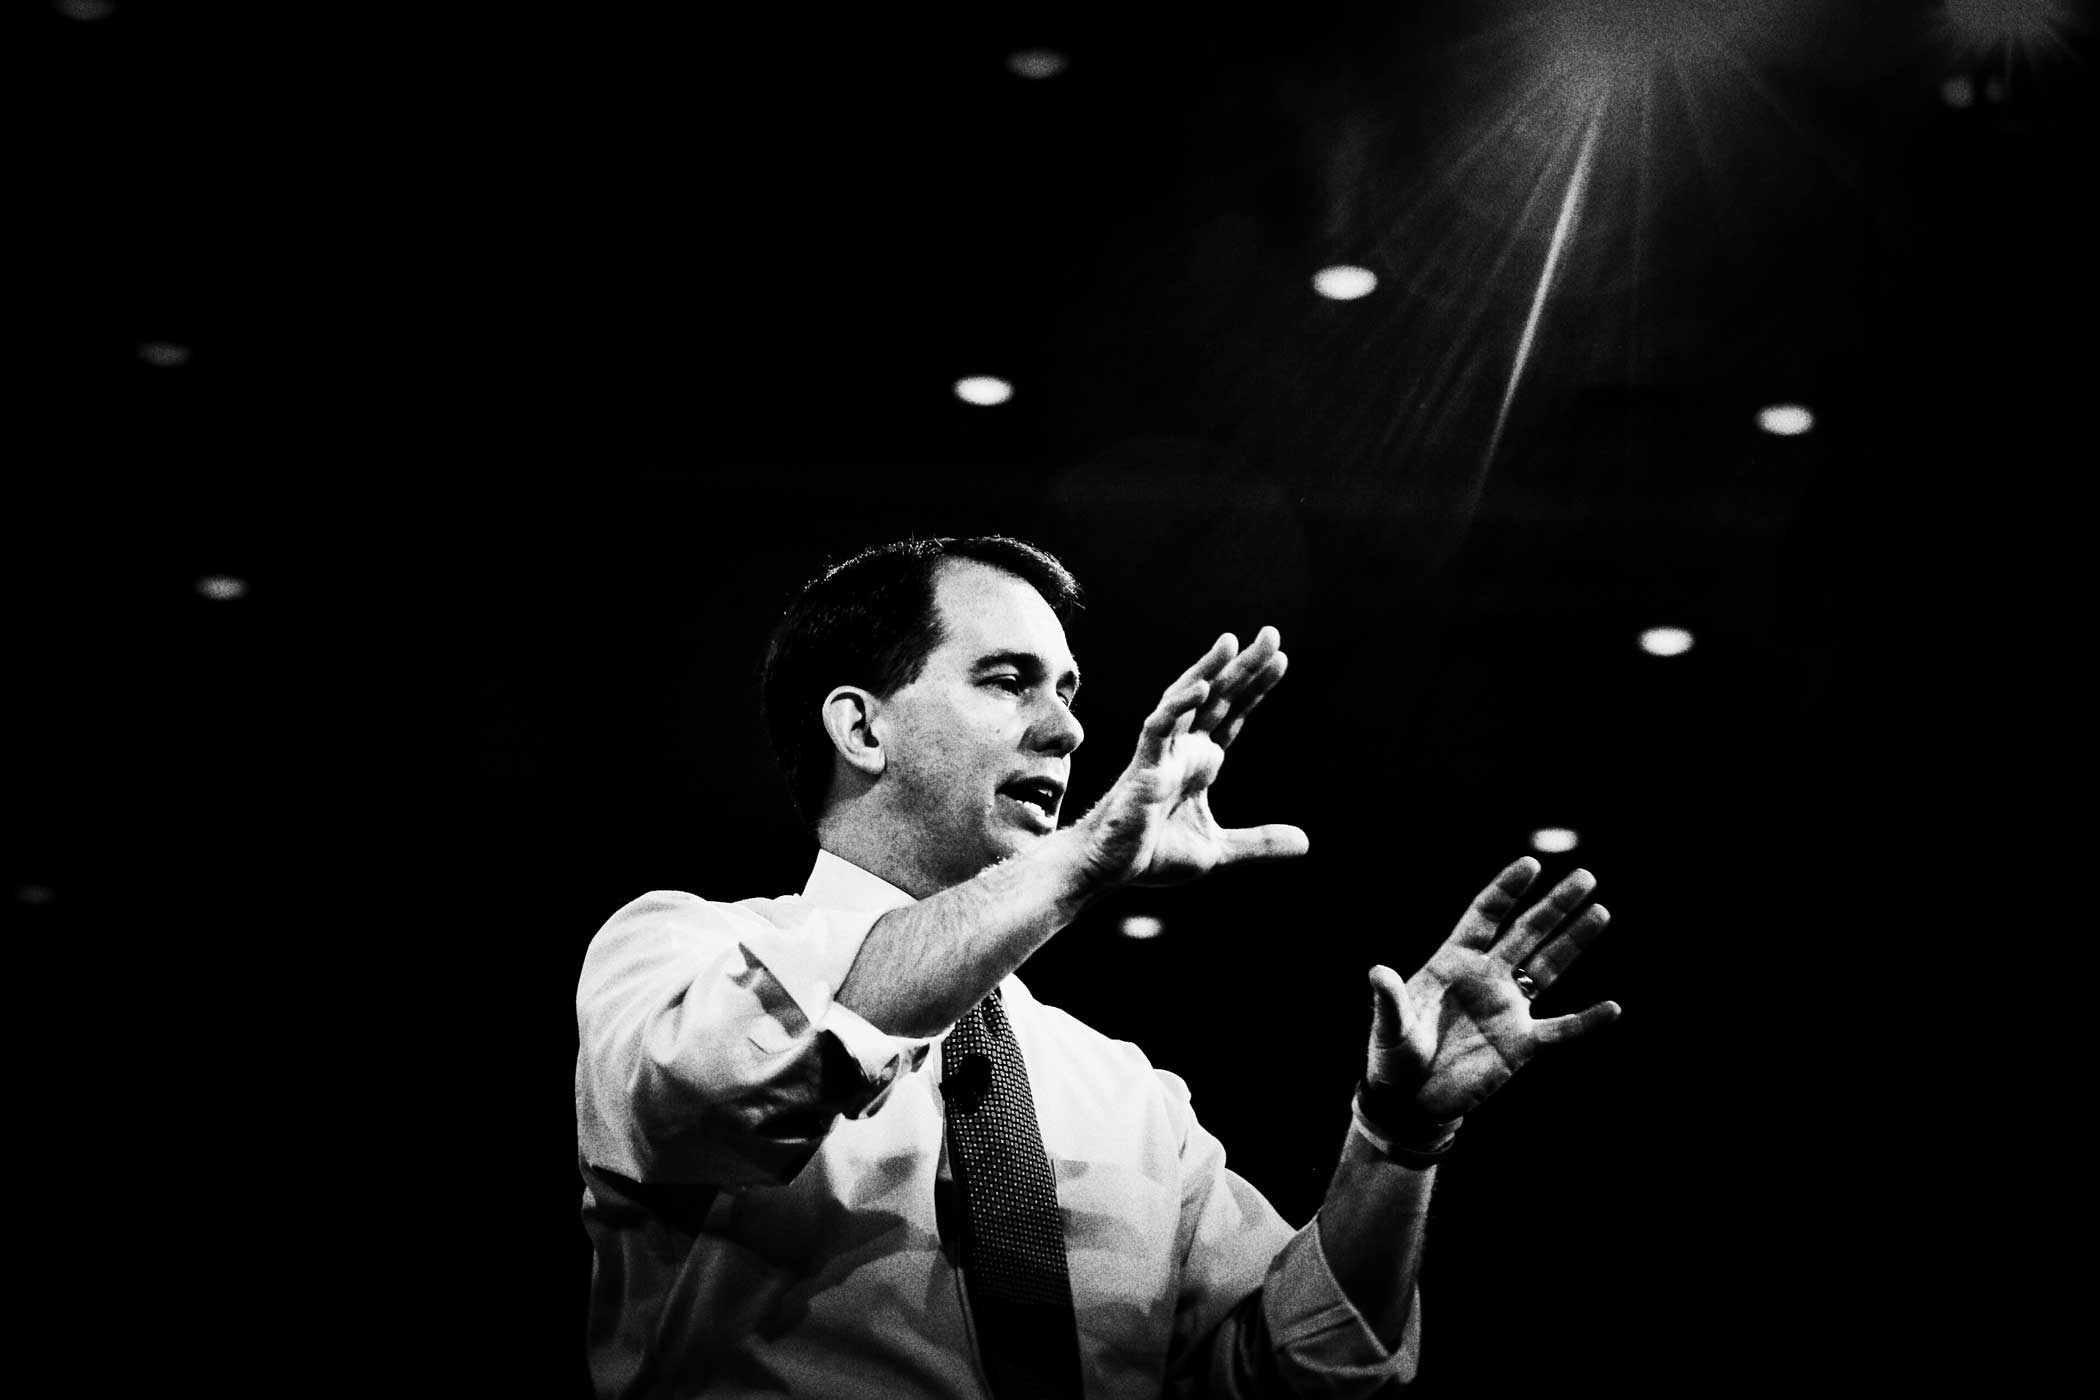 Wisconsin Governor Scott Walker at the 42nd annual Conservative Political Action Conference (CPAC) at National Harbor, MD on Feb. 26, 2015.